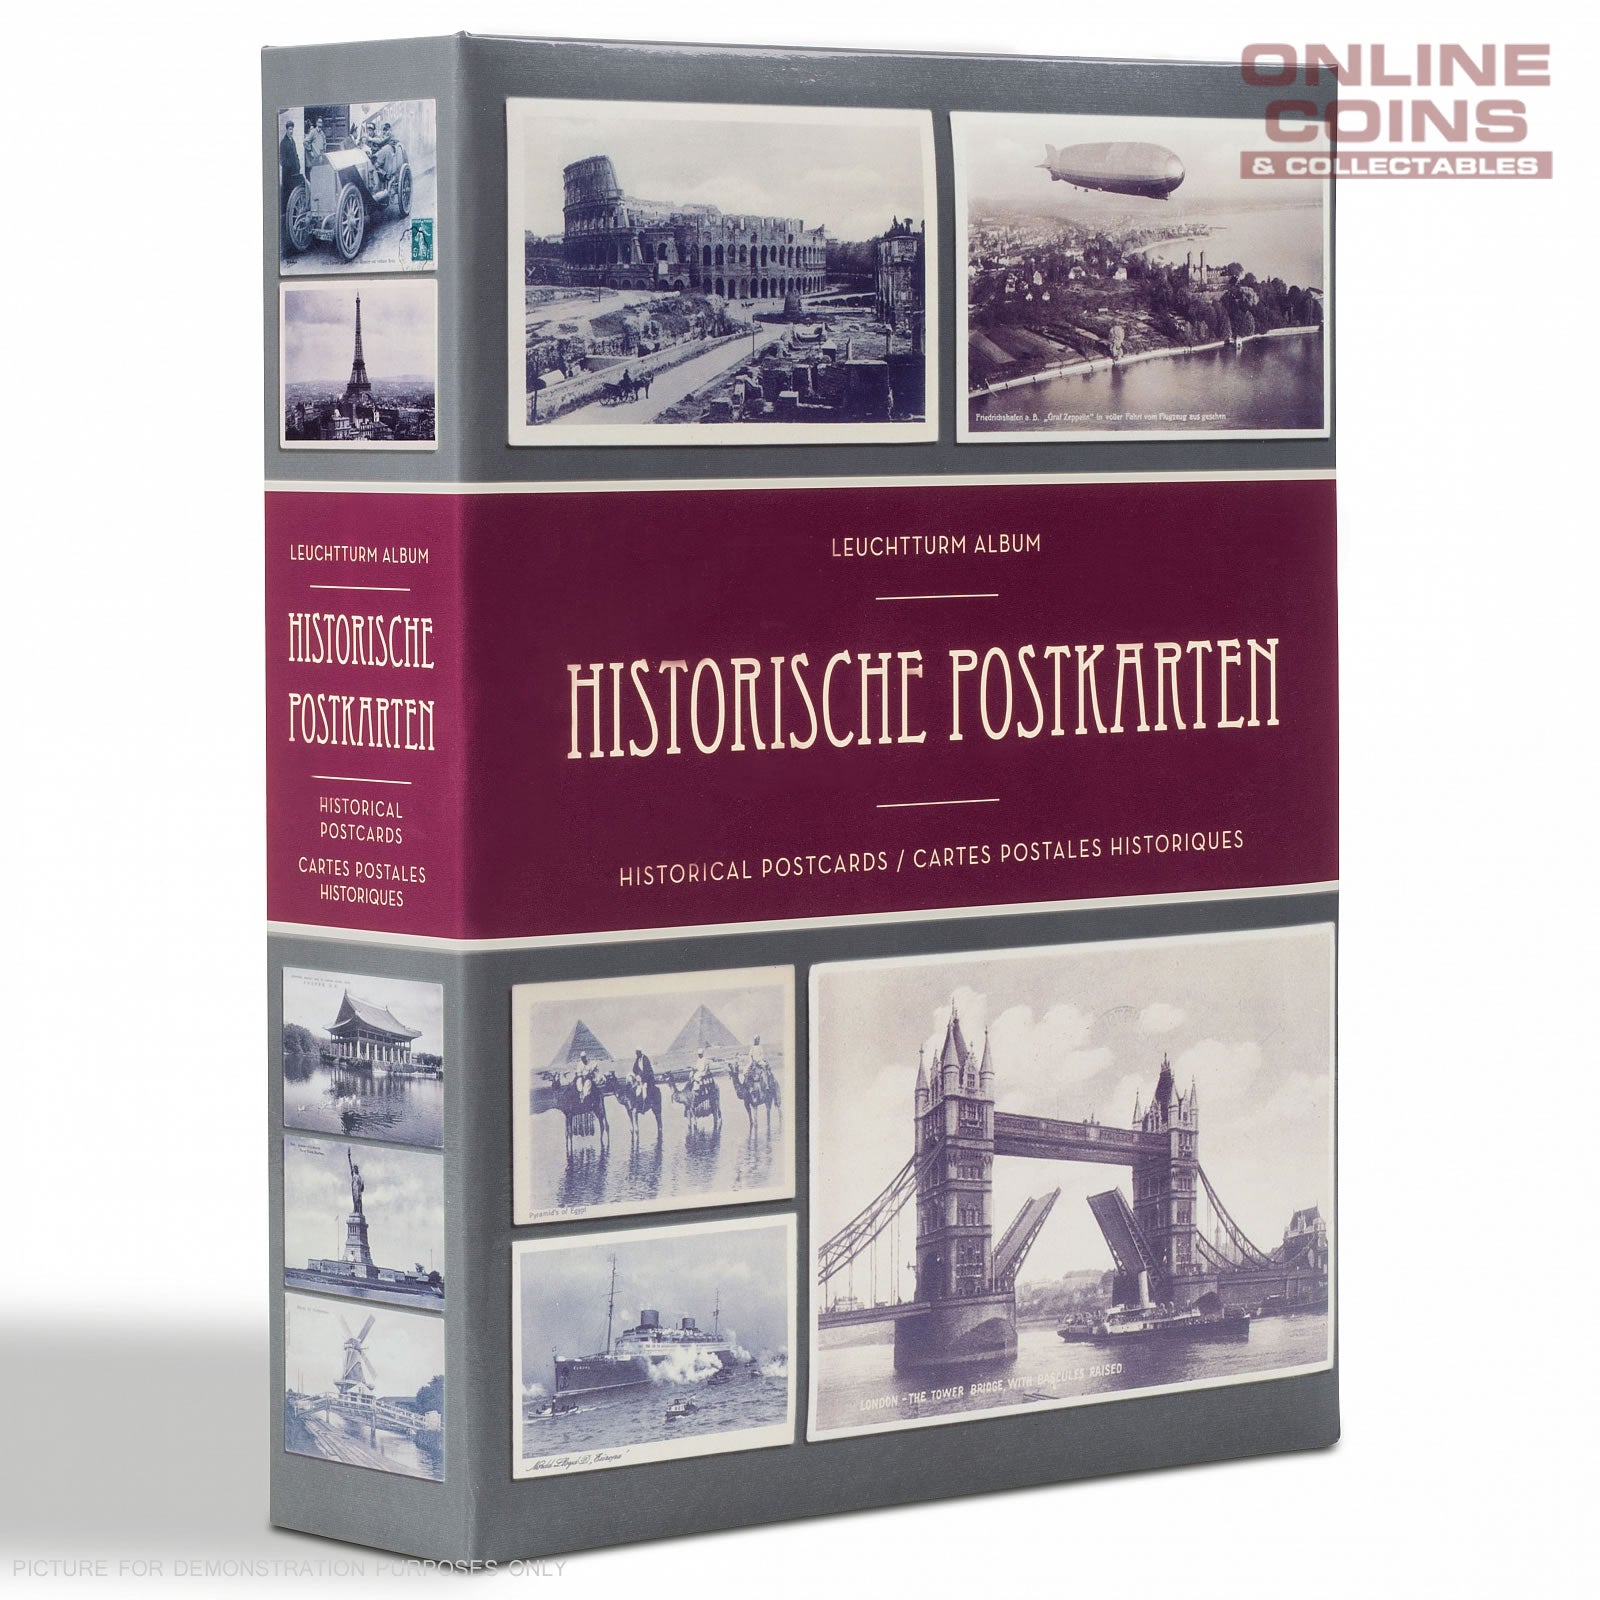 Lighthouse Postcard Album For 200 Historical Postcards With 50 Bound Pages